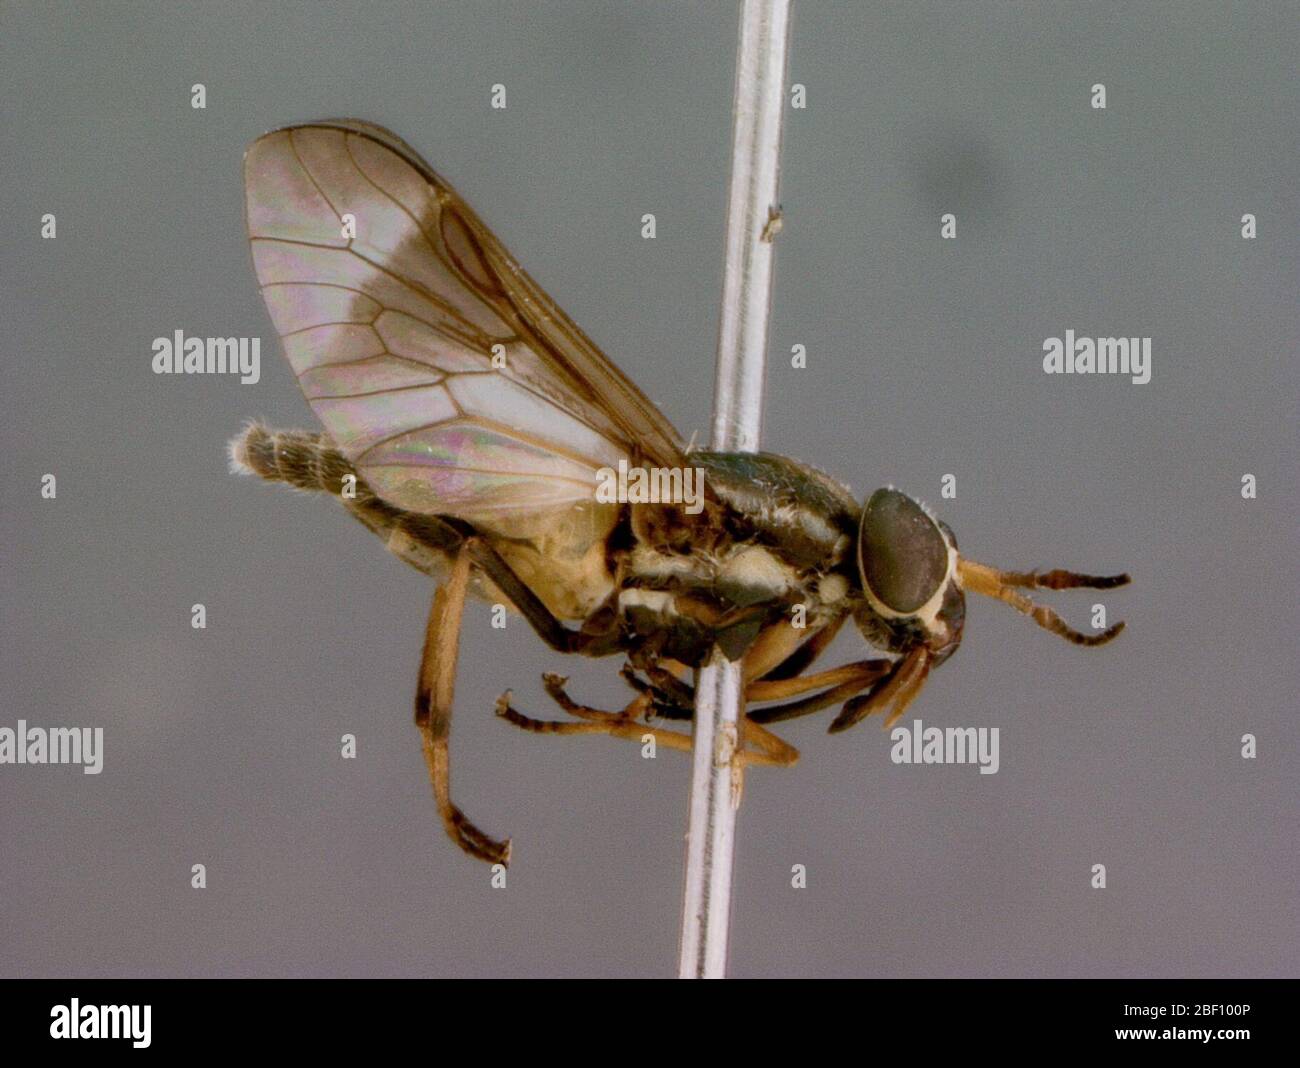 Chrysops harmani. Holotype female, 7mm. Antennae normal, first segment yellow, second brownish, third dark brown to black with basal portion somewhat lighter. Frons with grayish yellow pollen; frontal callosity black, some- what broader than tall. Stock Photo